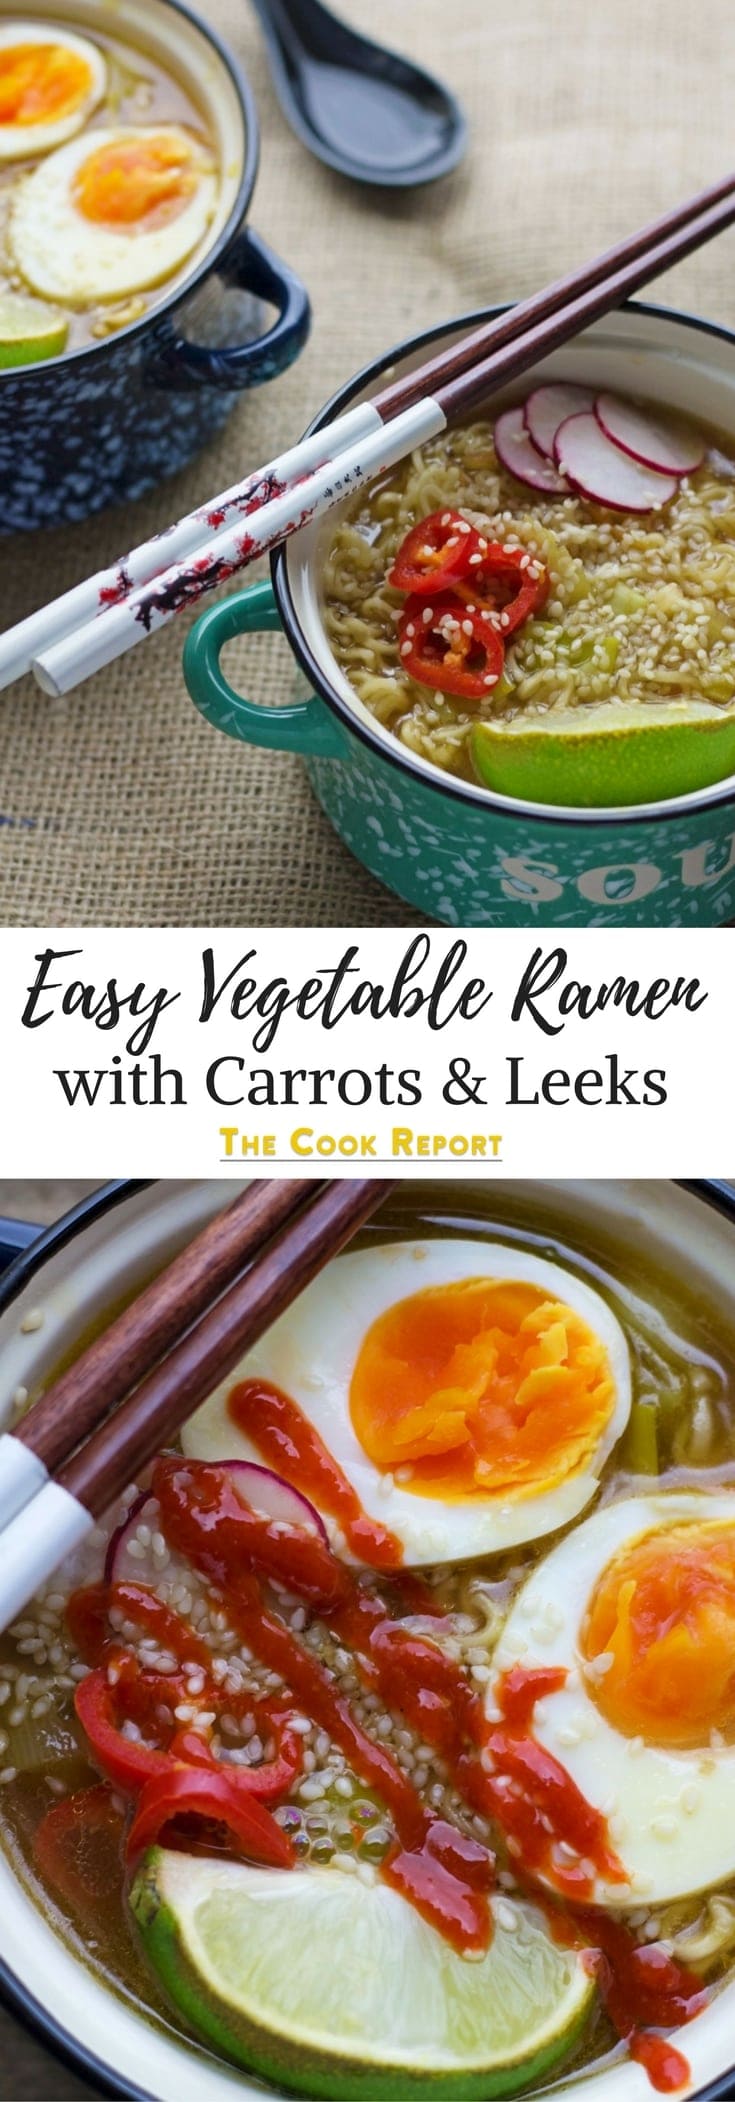 Looking for a delicious vegetarian dinner that can be made in 30 minutes or less? This easy vegetable ramen is the perfect thing!